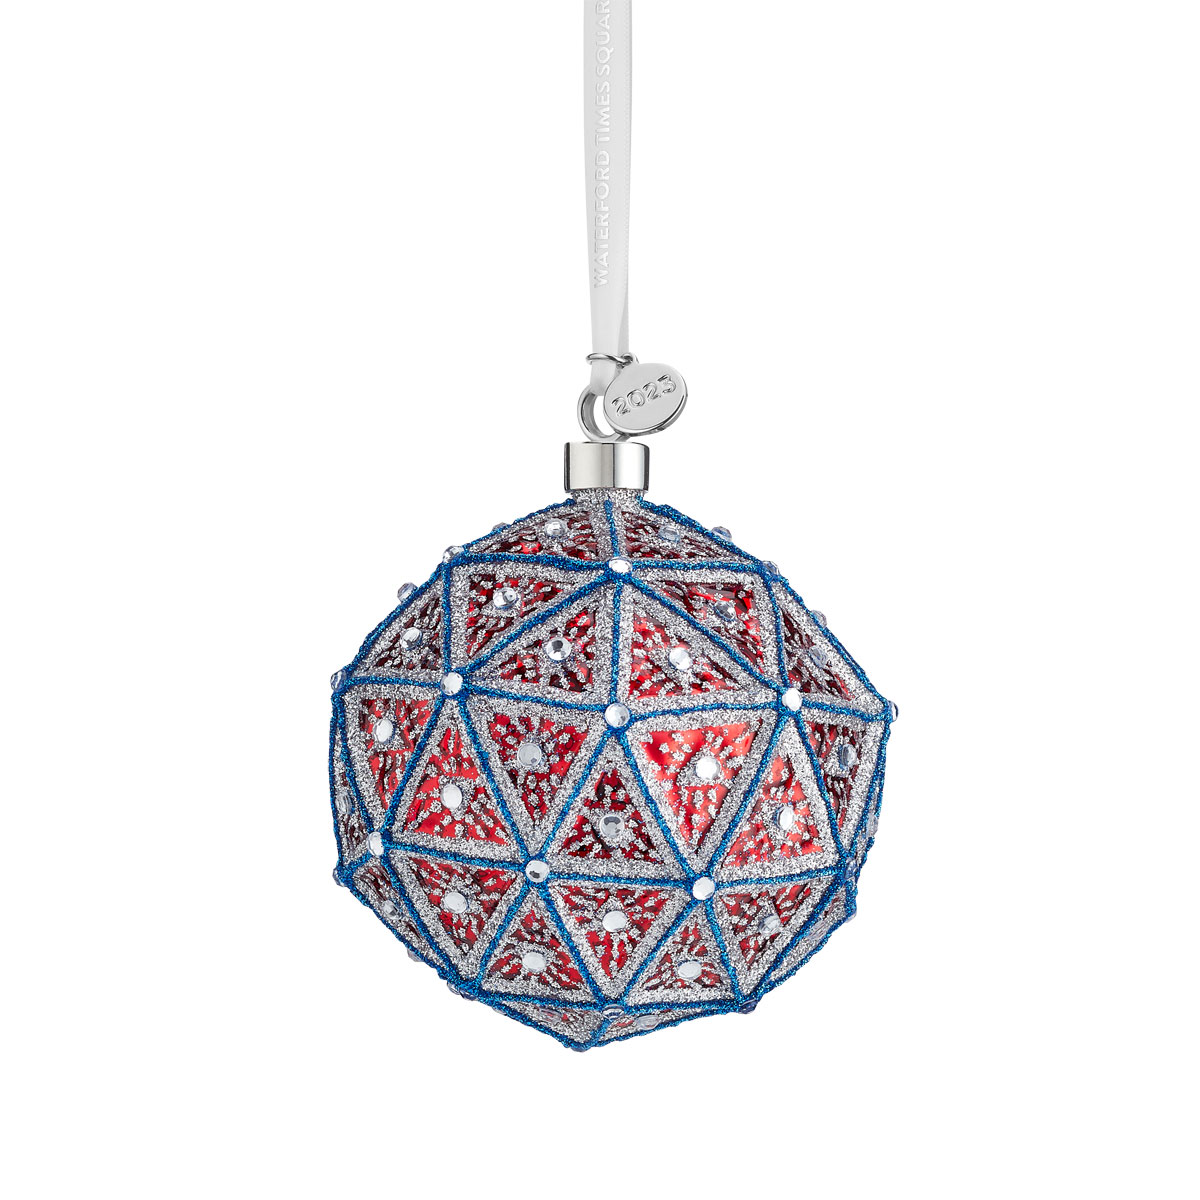 Waterford Crystal Times Square 2023 Replica Ball Ornament